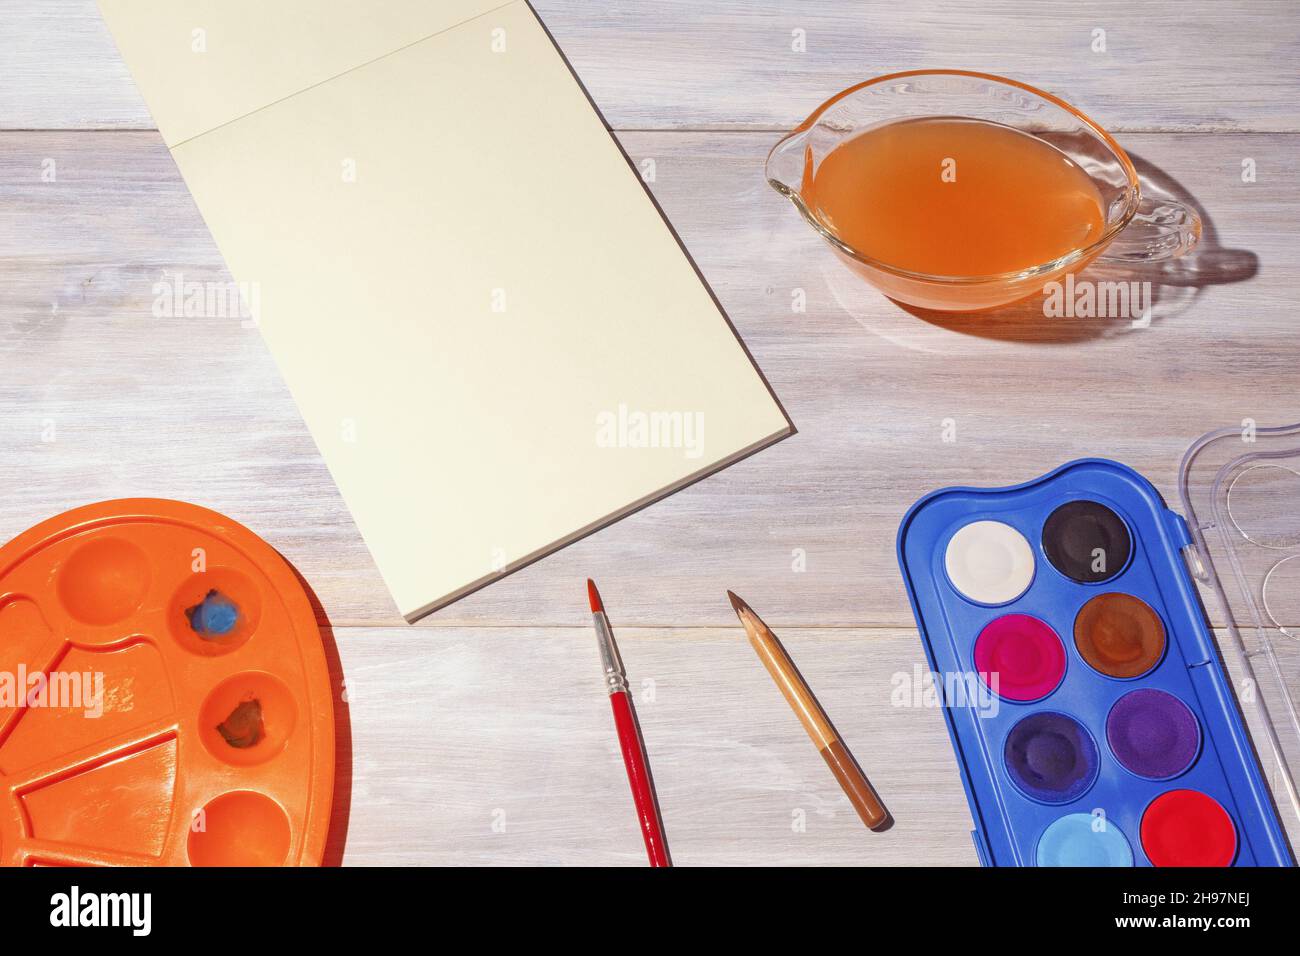 Watercolor painting. Sketchbook, watercolor paints, palette and cup of water on rustic table.  School concept. Free space for text or image Stock Photo